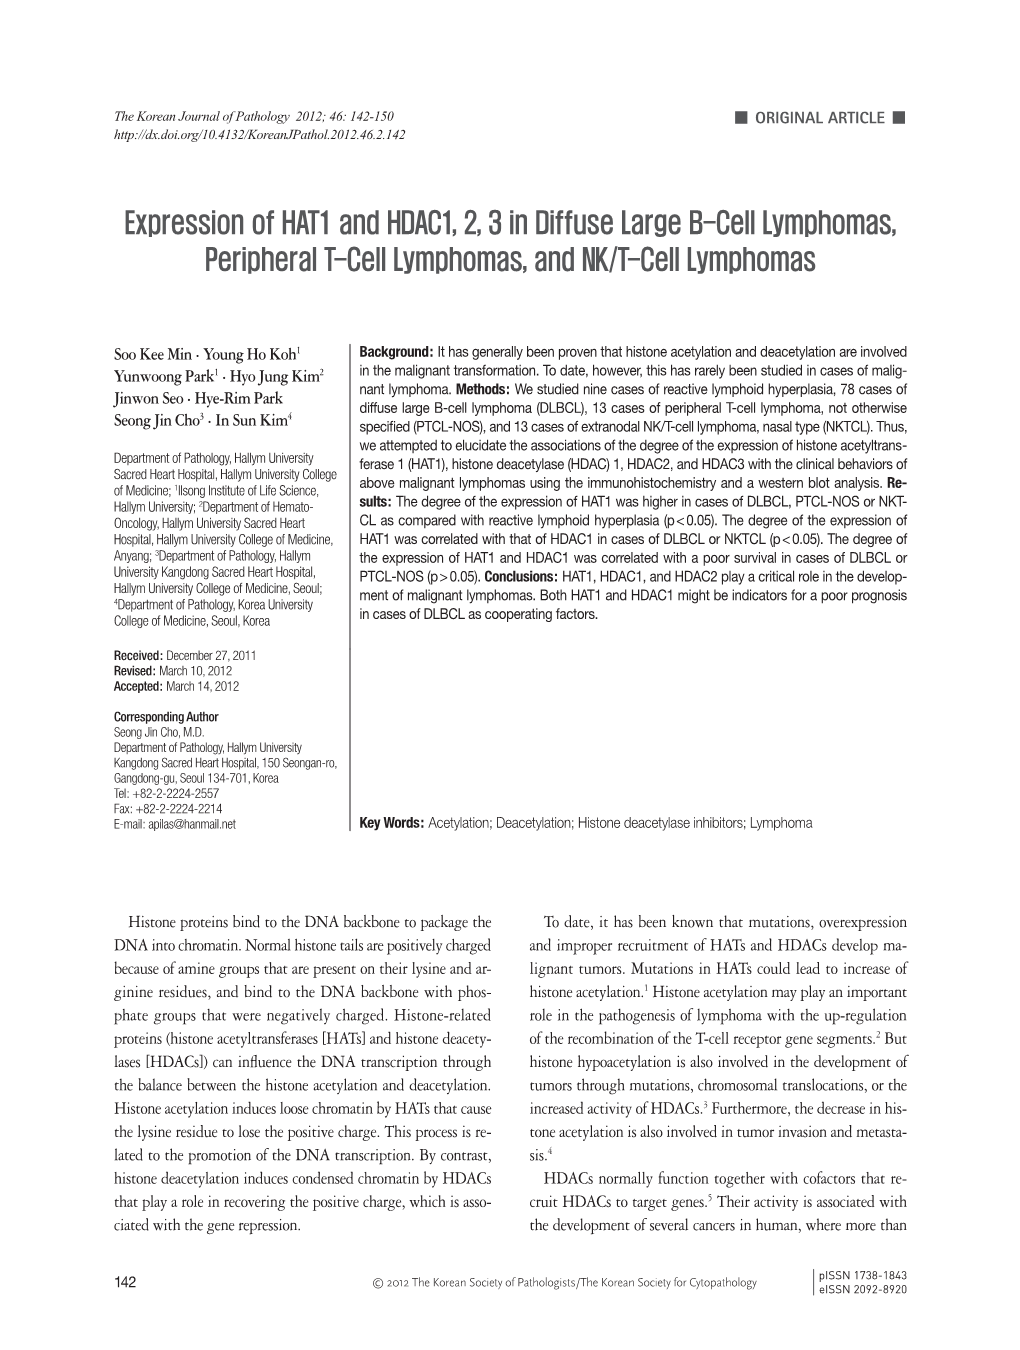 Expression of HAT1 and HDAC1, 2, 3 in Diffuse Large B-Cell Lymphomas, Peripheral T-Cell Lymphomas, and NK/T-Cell Lymphomas